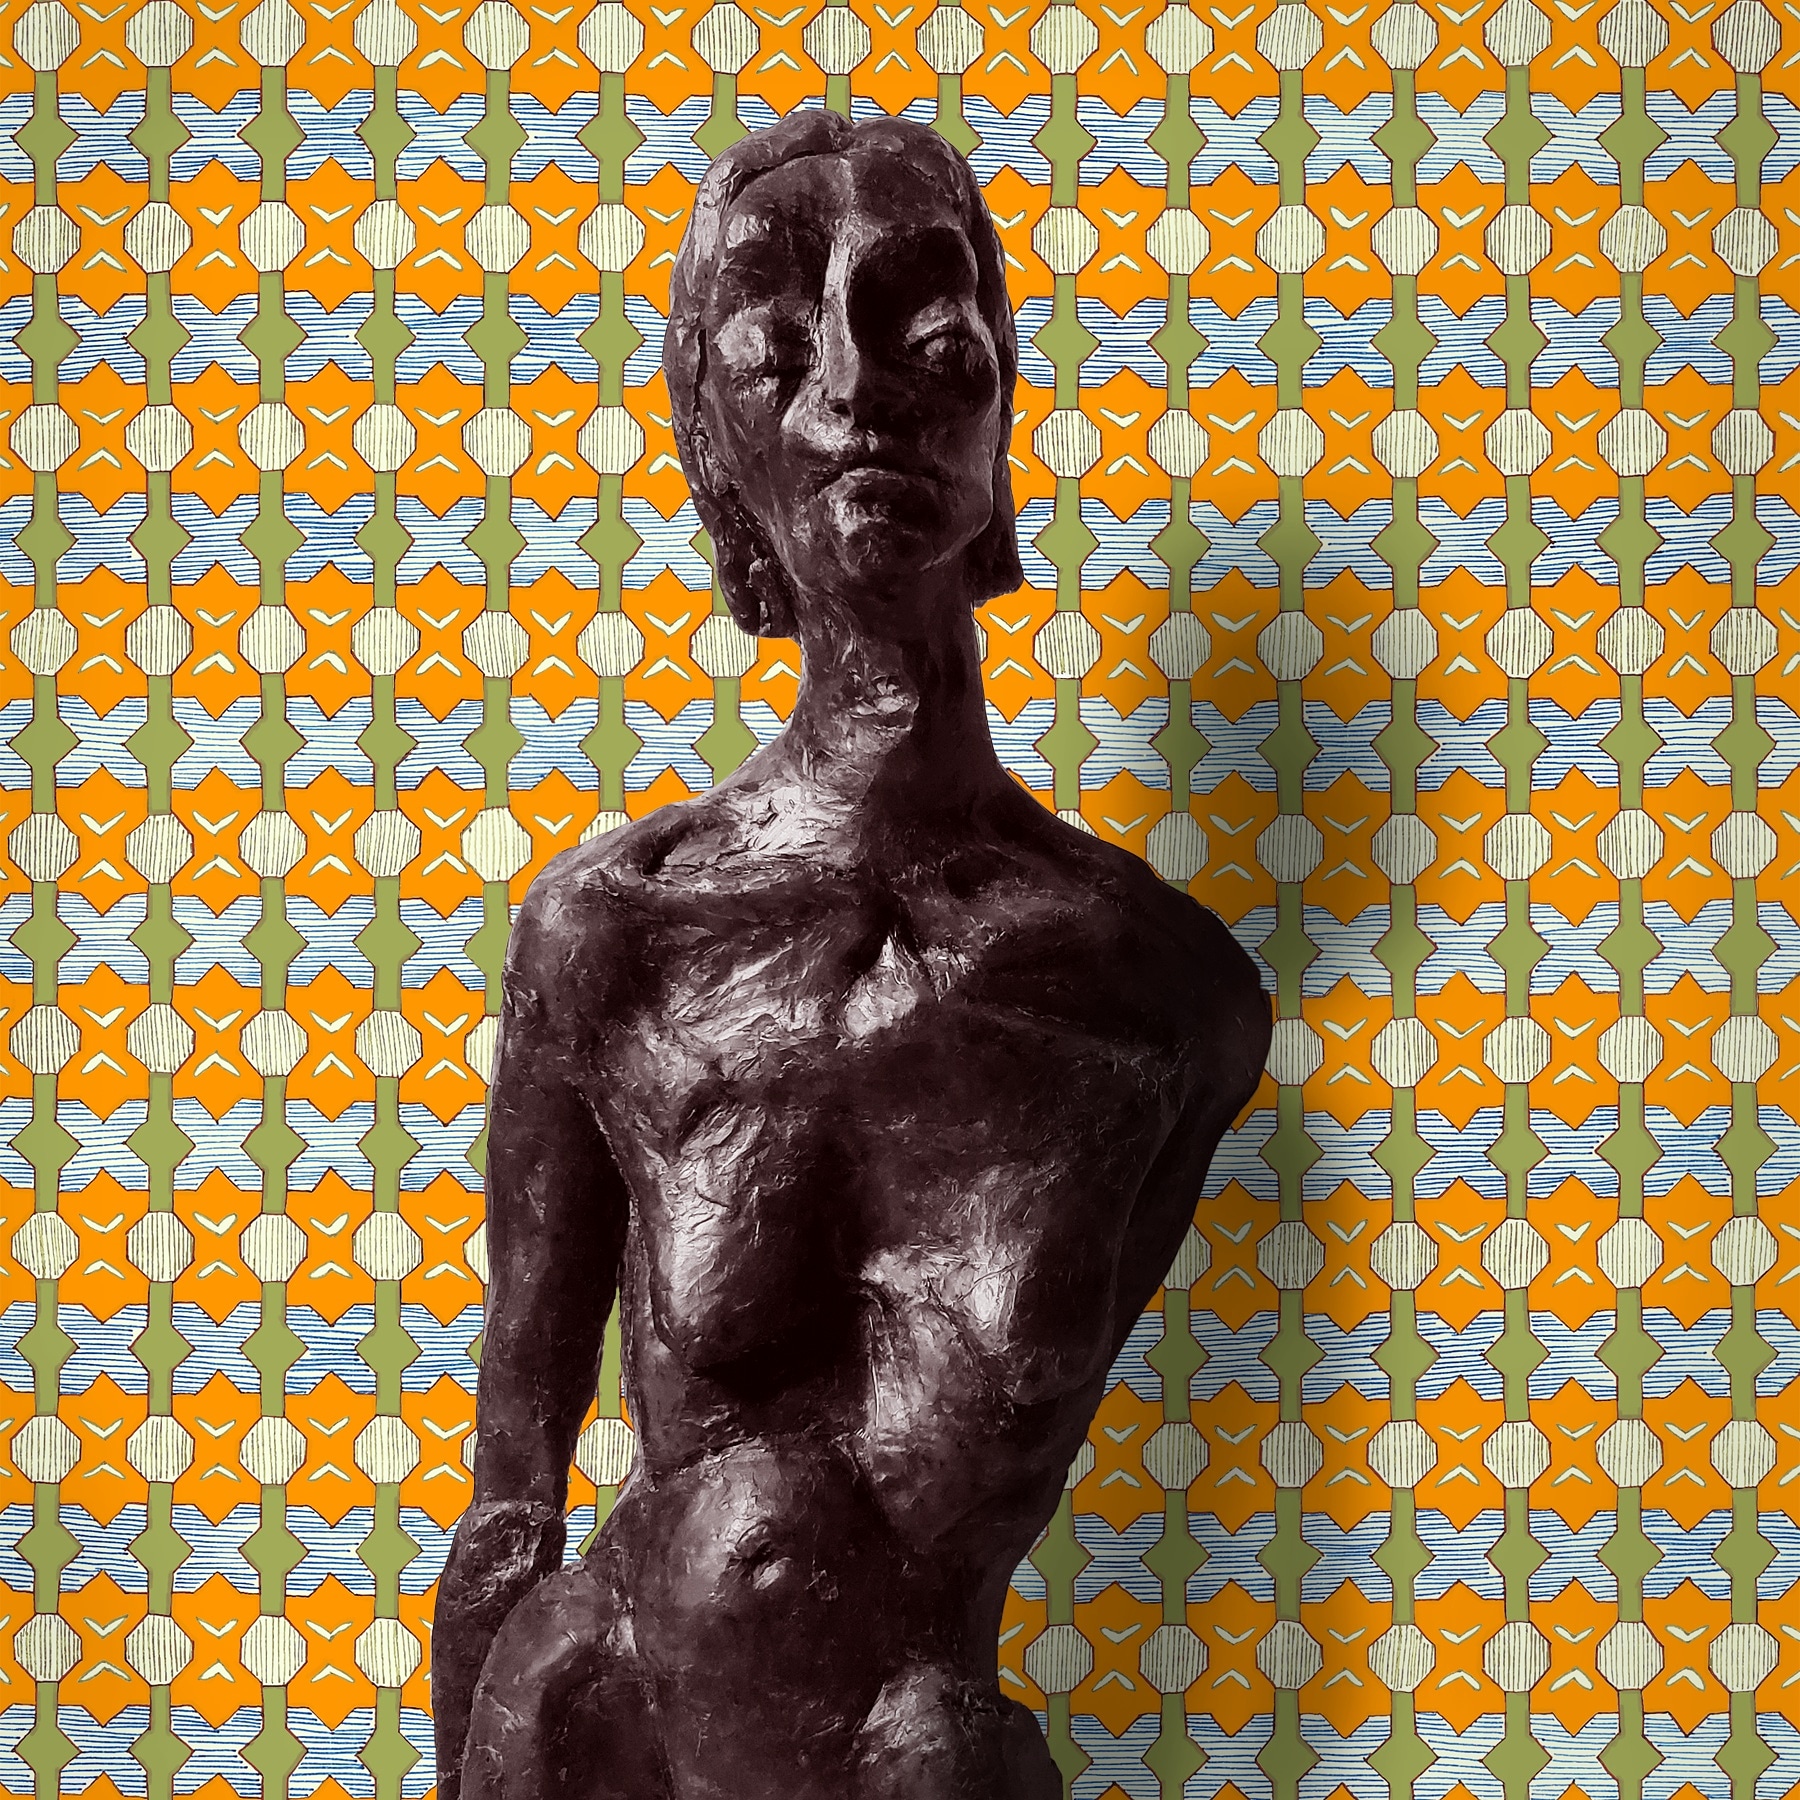 orange, green, blue tessellated background, geometric pattern for wax sculpture of stoic figure